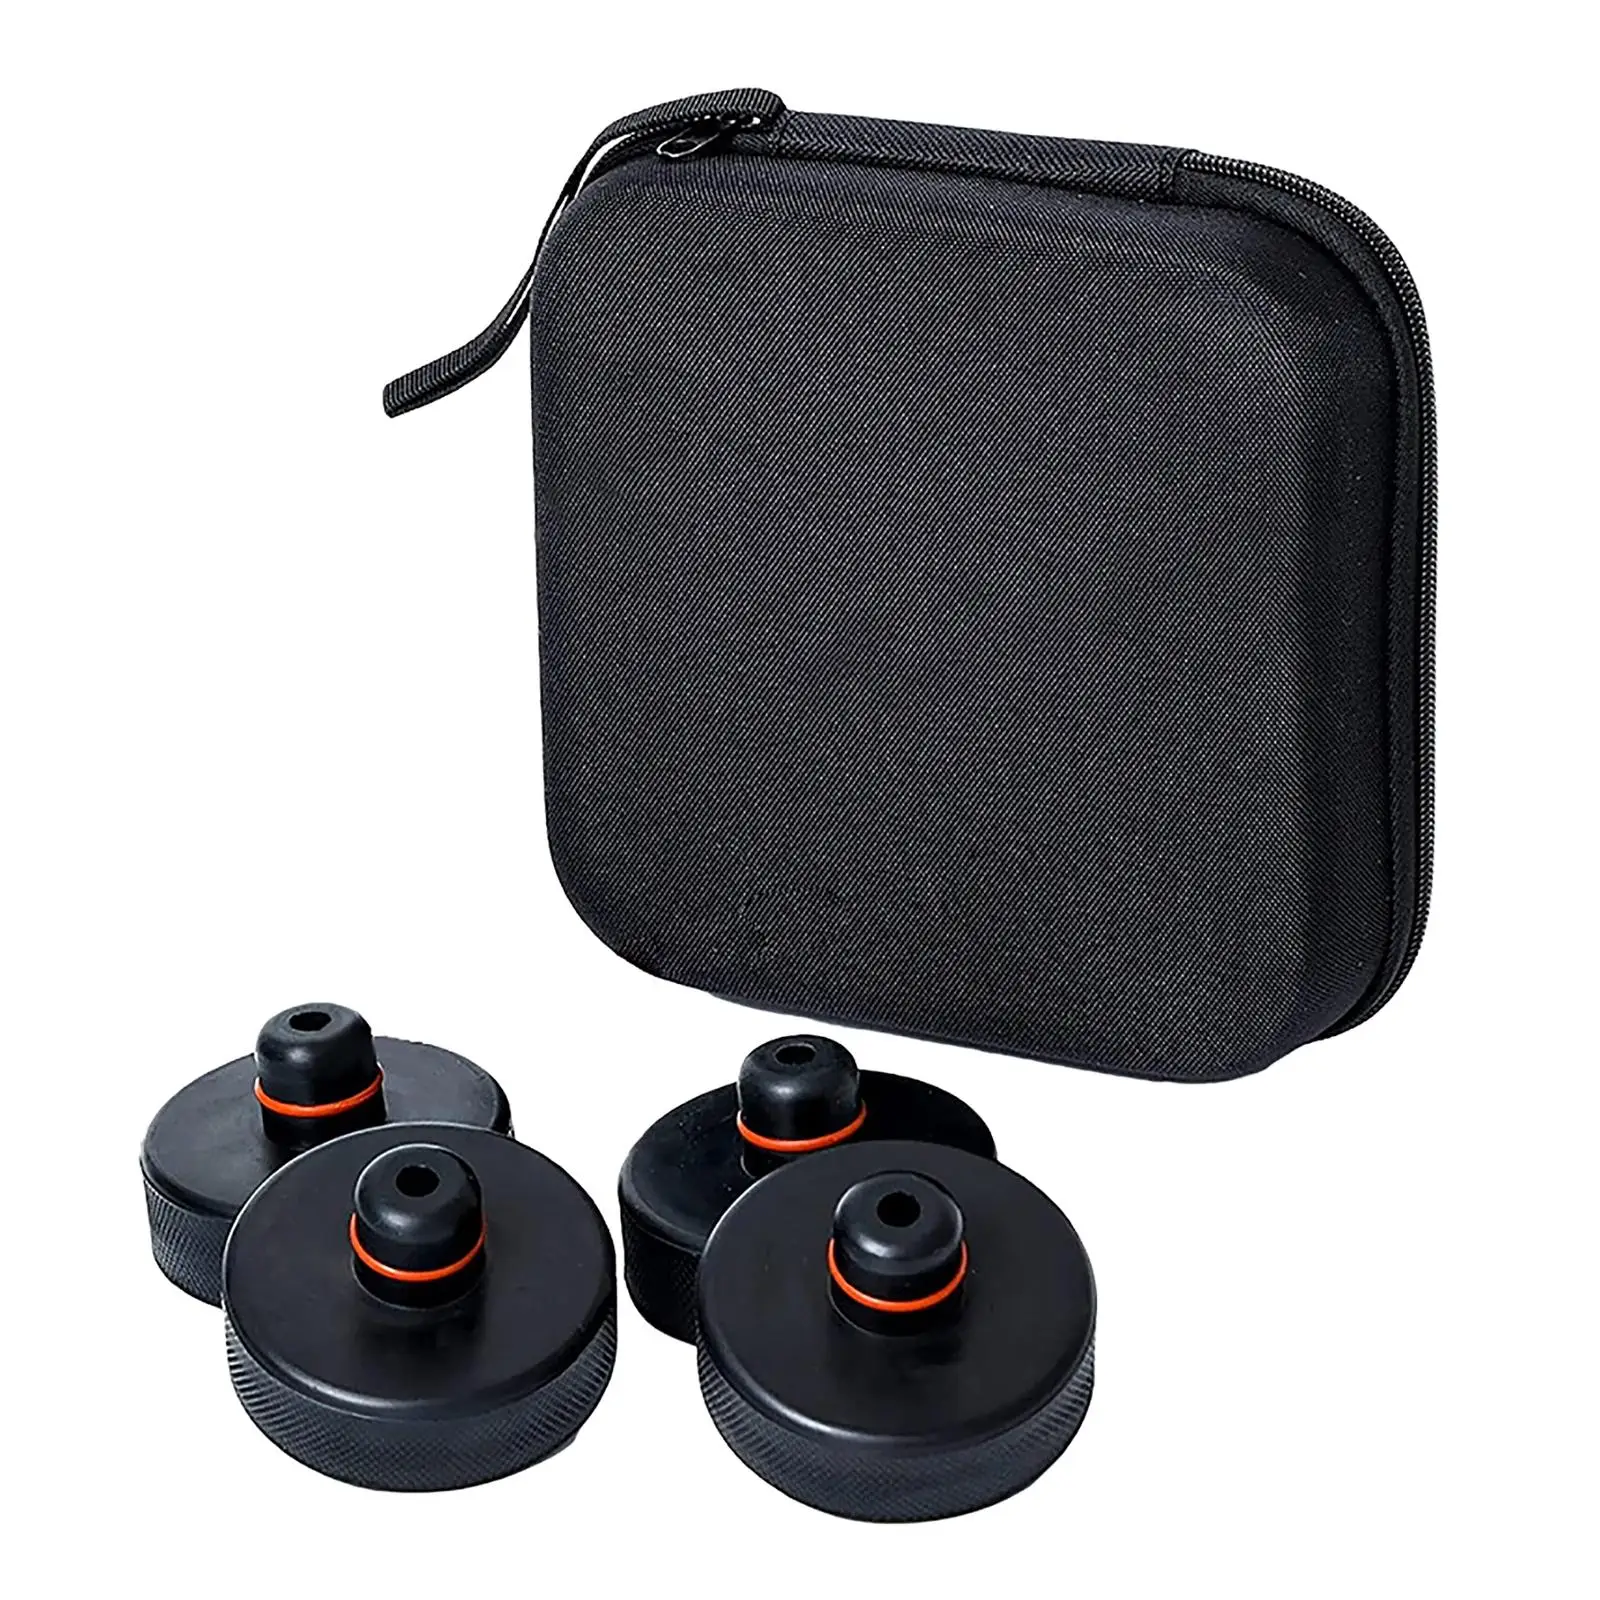 Car Jack Lift Pad Adapter Tool with Storage Case for Y ,Ensures Greater Stability ,Easy to Use Protection